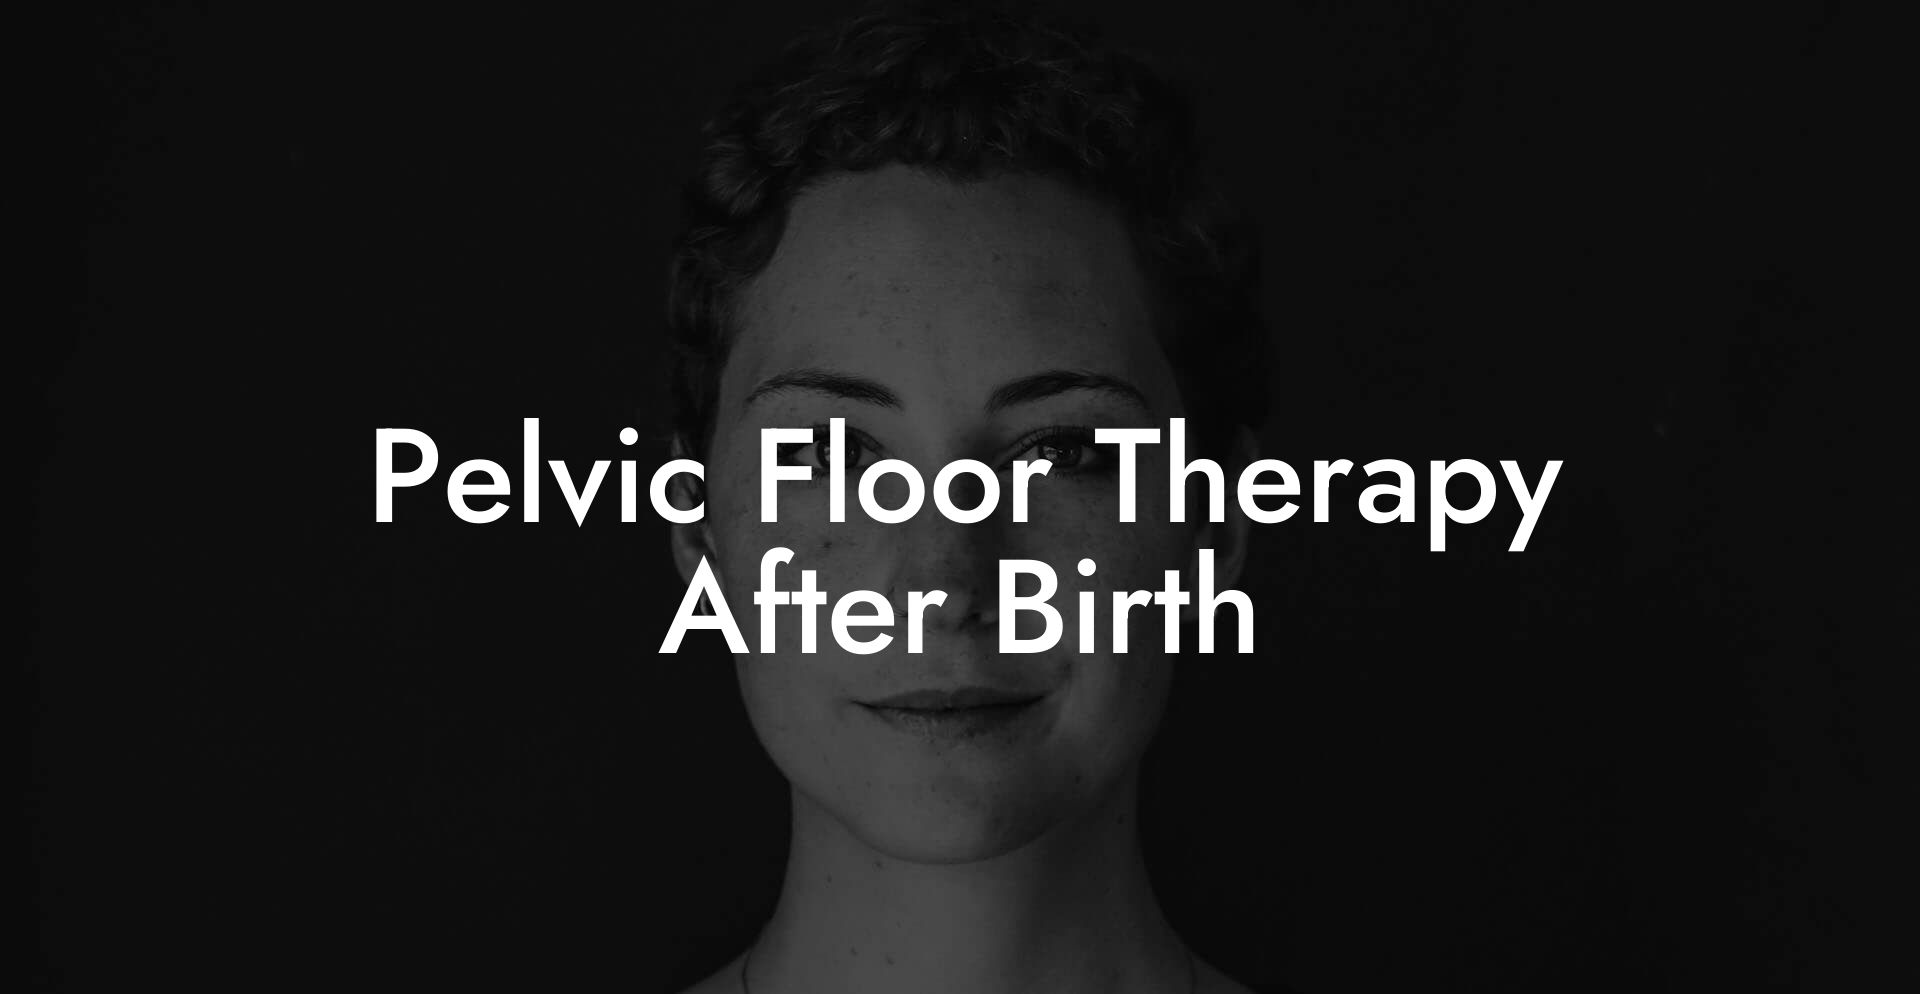 Pelvic Floor Therapy After Birth